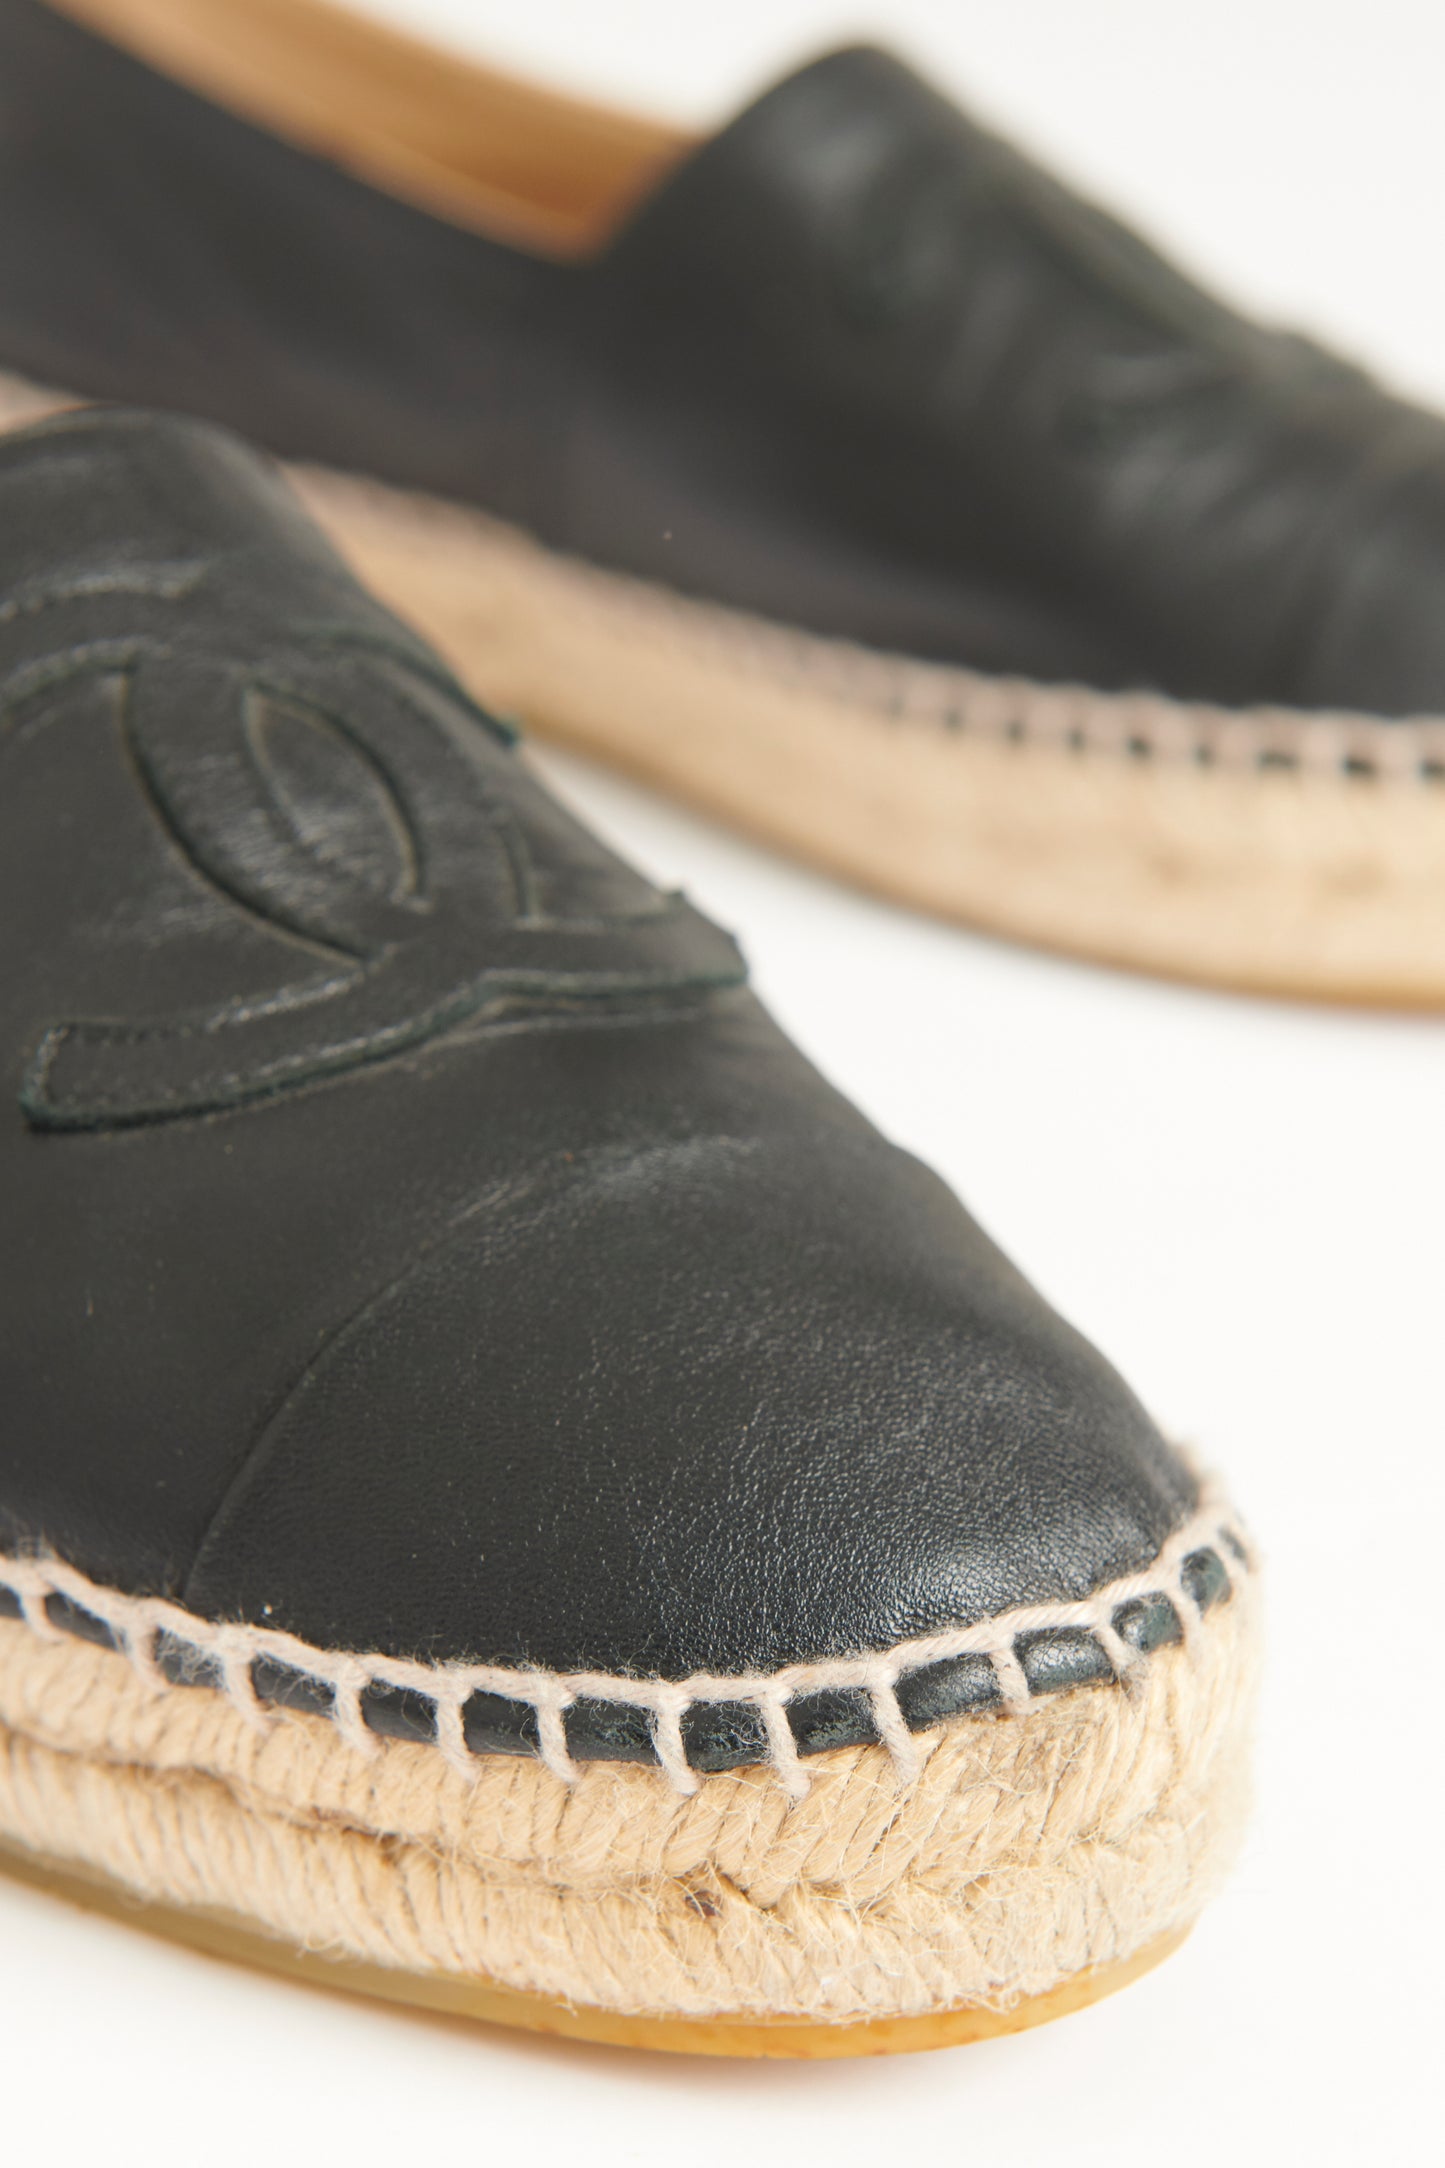 Black Leather Preowned CC Embroidered Espadrilles